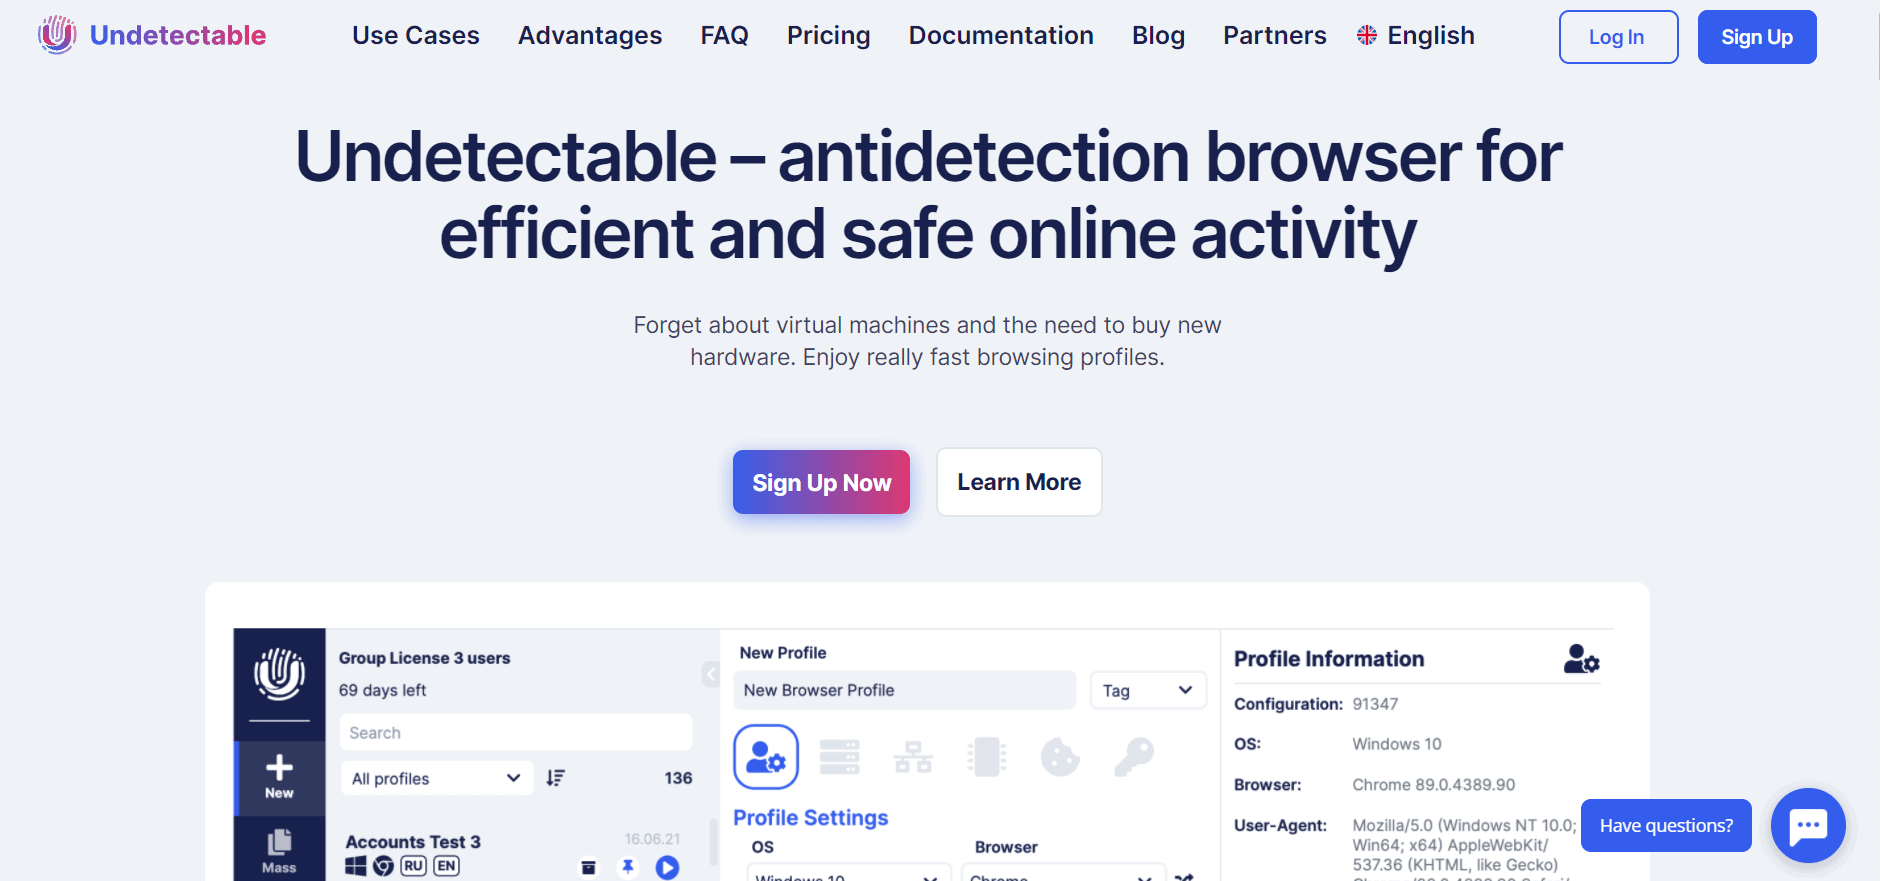 undetectable Overview